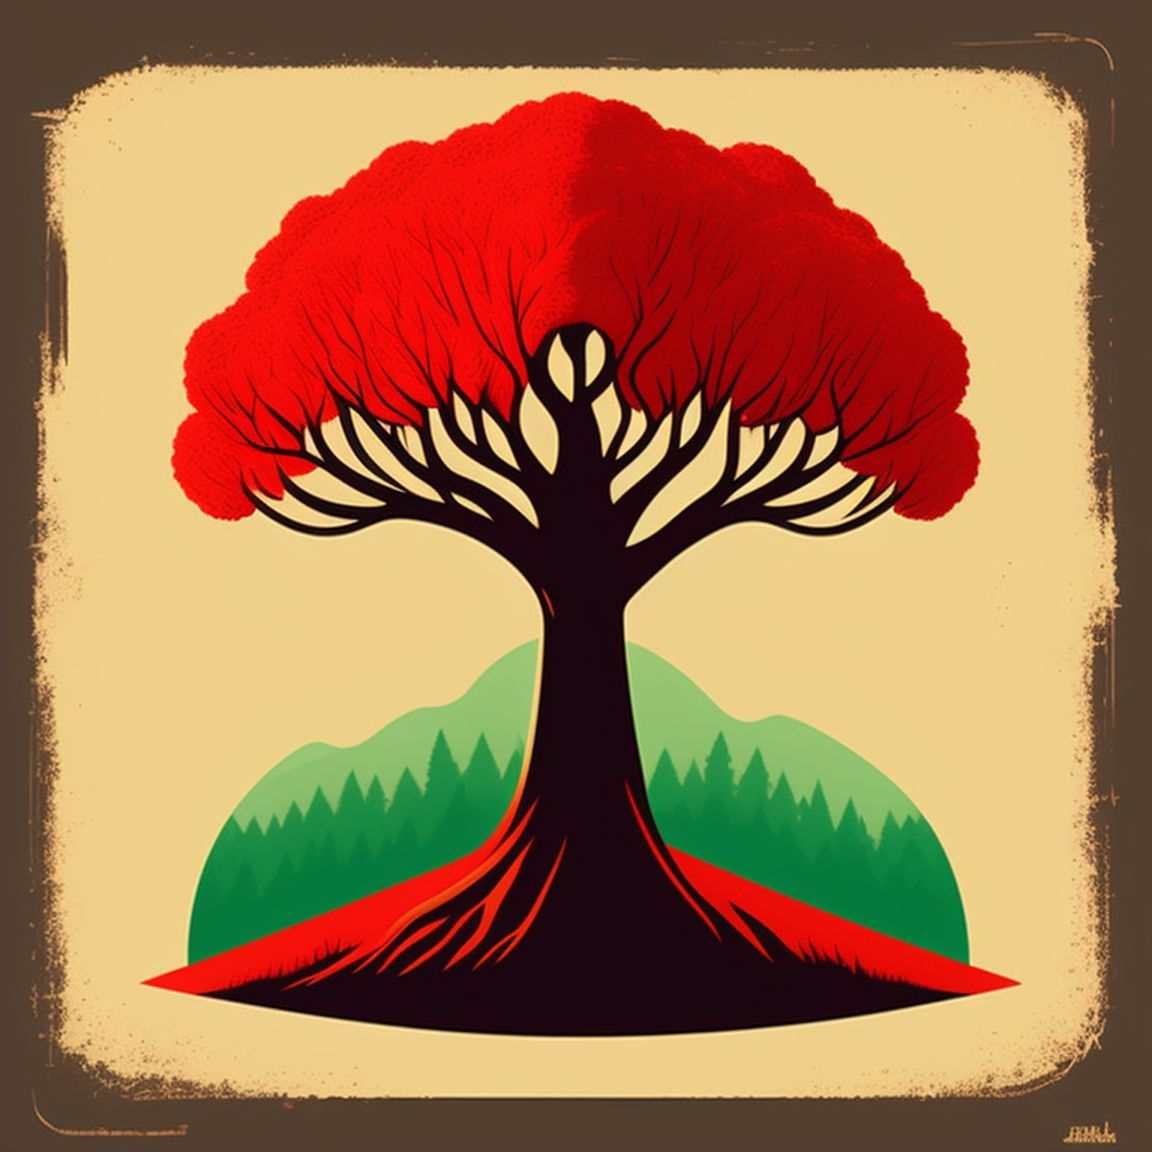 Retro, Vintage, flat design, (((Simple))), tree, Art by Butcher Billy, Illustration, Highly detailed, Simple, Vector art